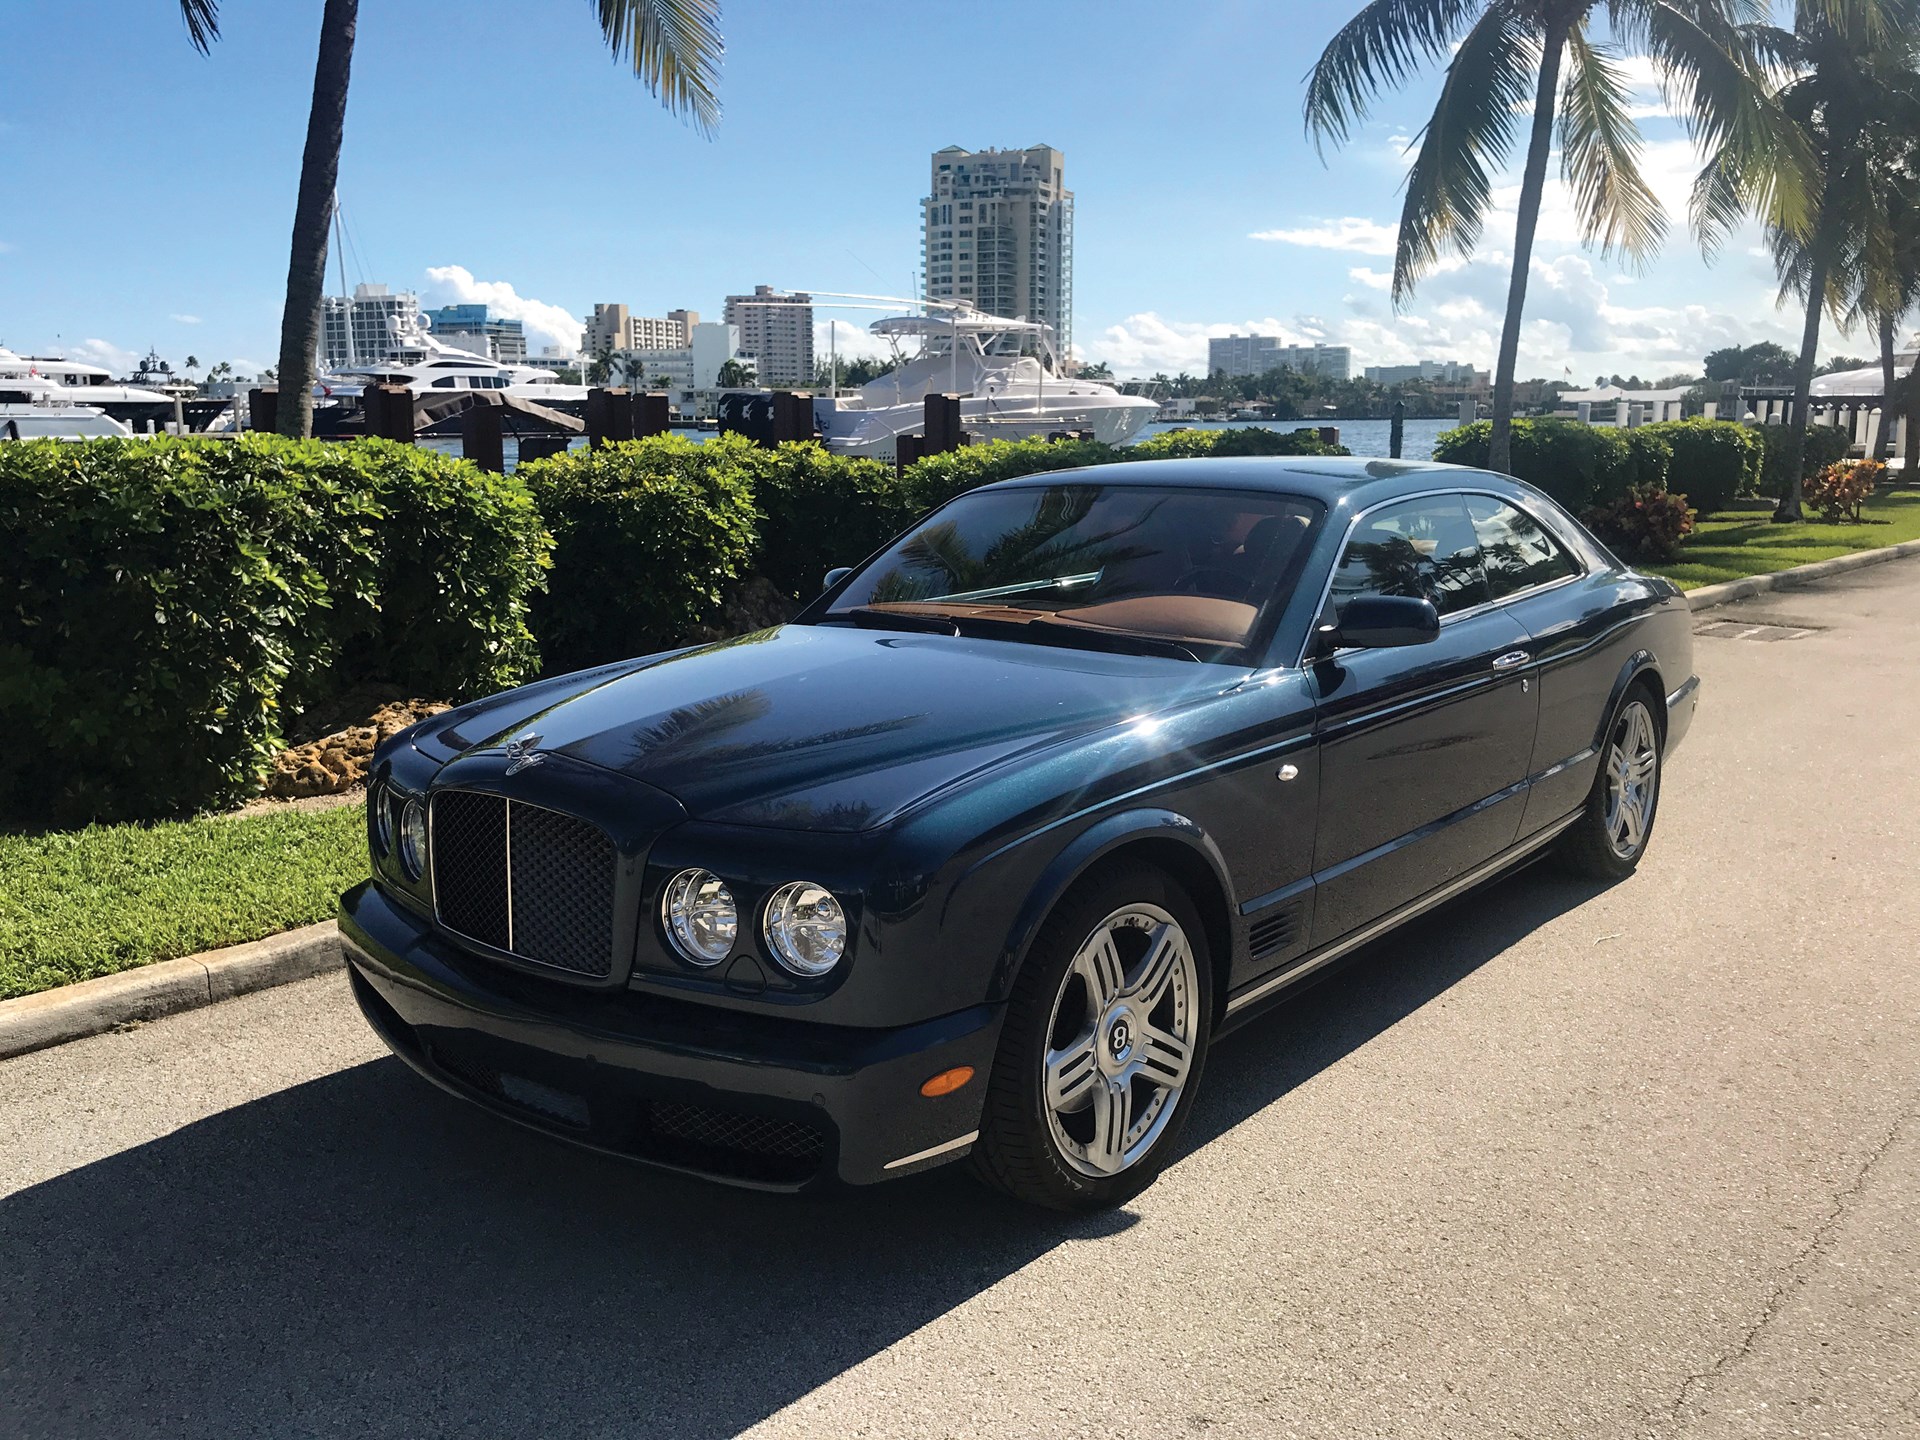 2009 Bentley Brooklands Coupe | Fort Lauderdale 2019 | RM Auctions